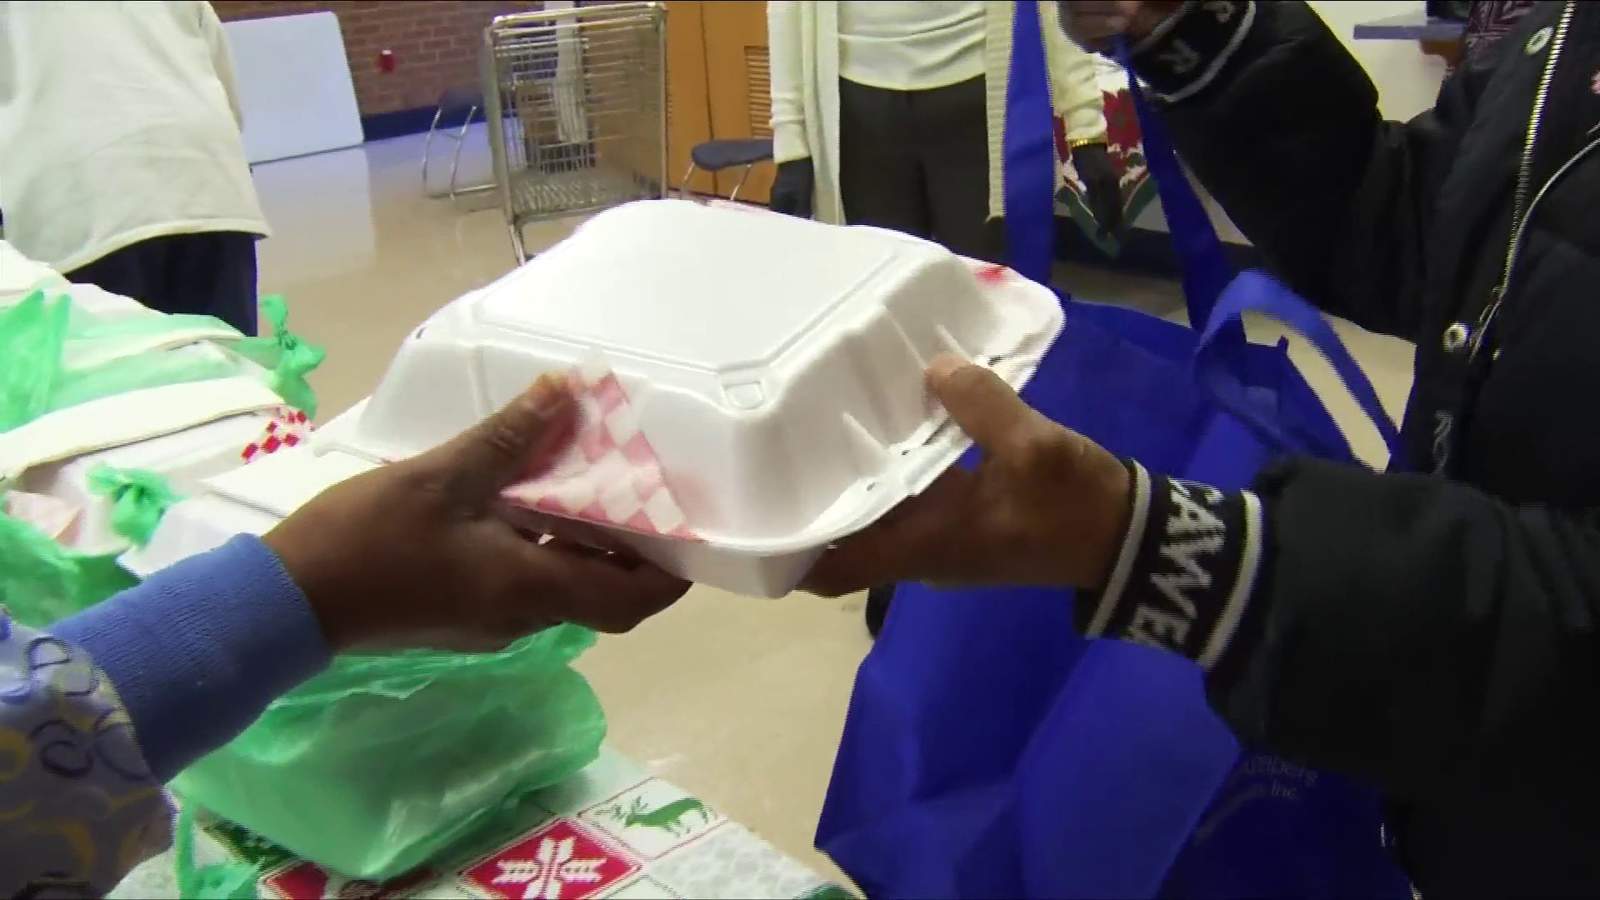 FarmBurguesa delivers hundreds of free meals to those in need